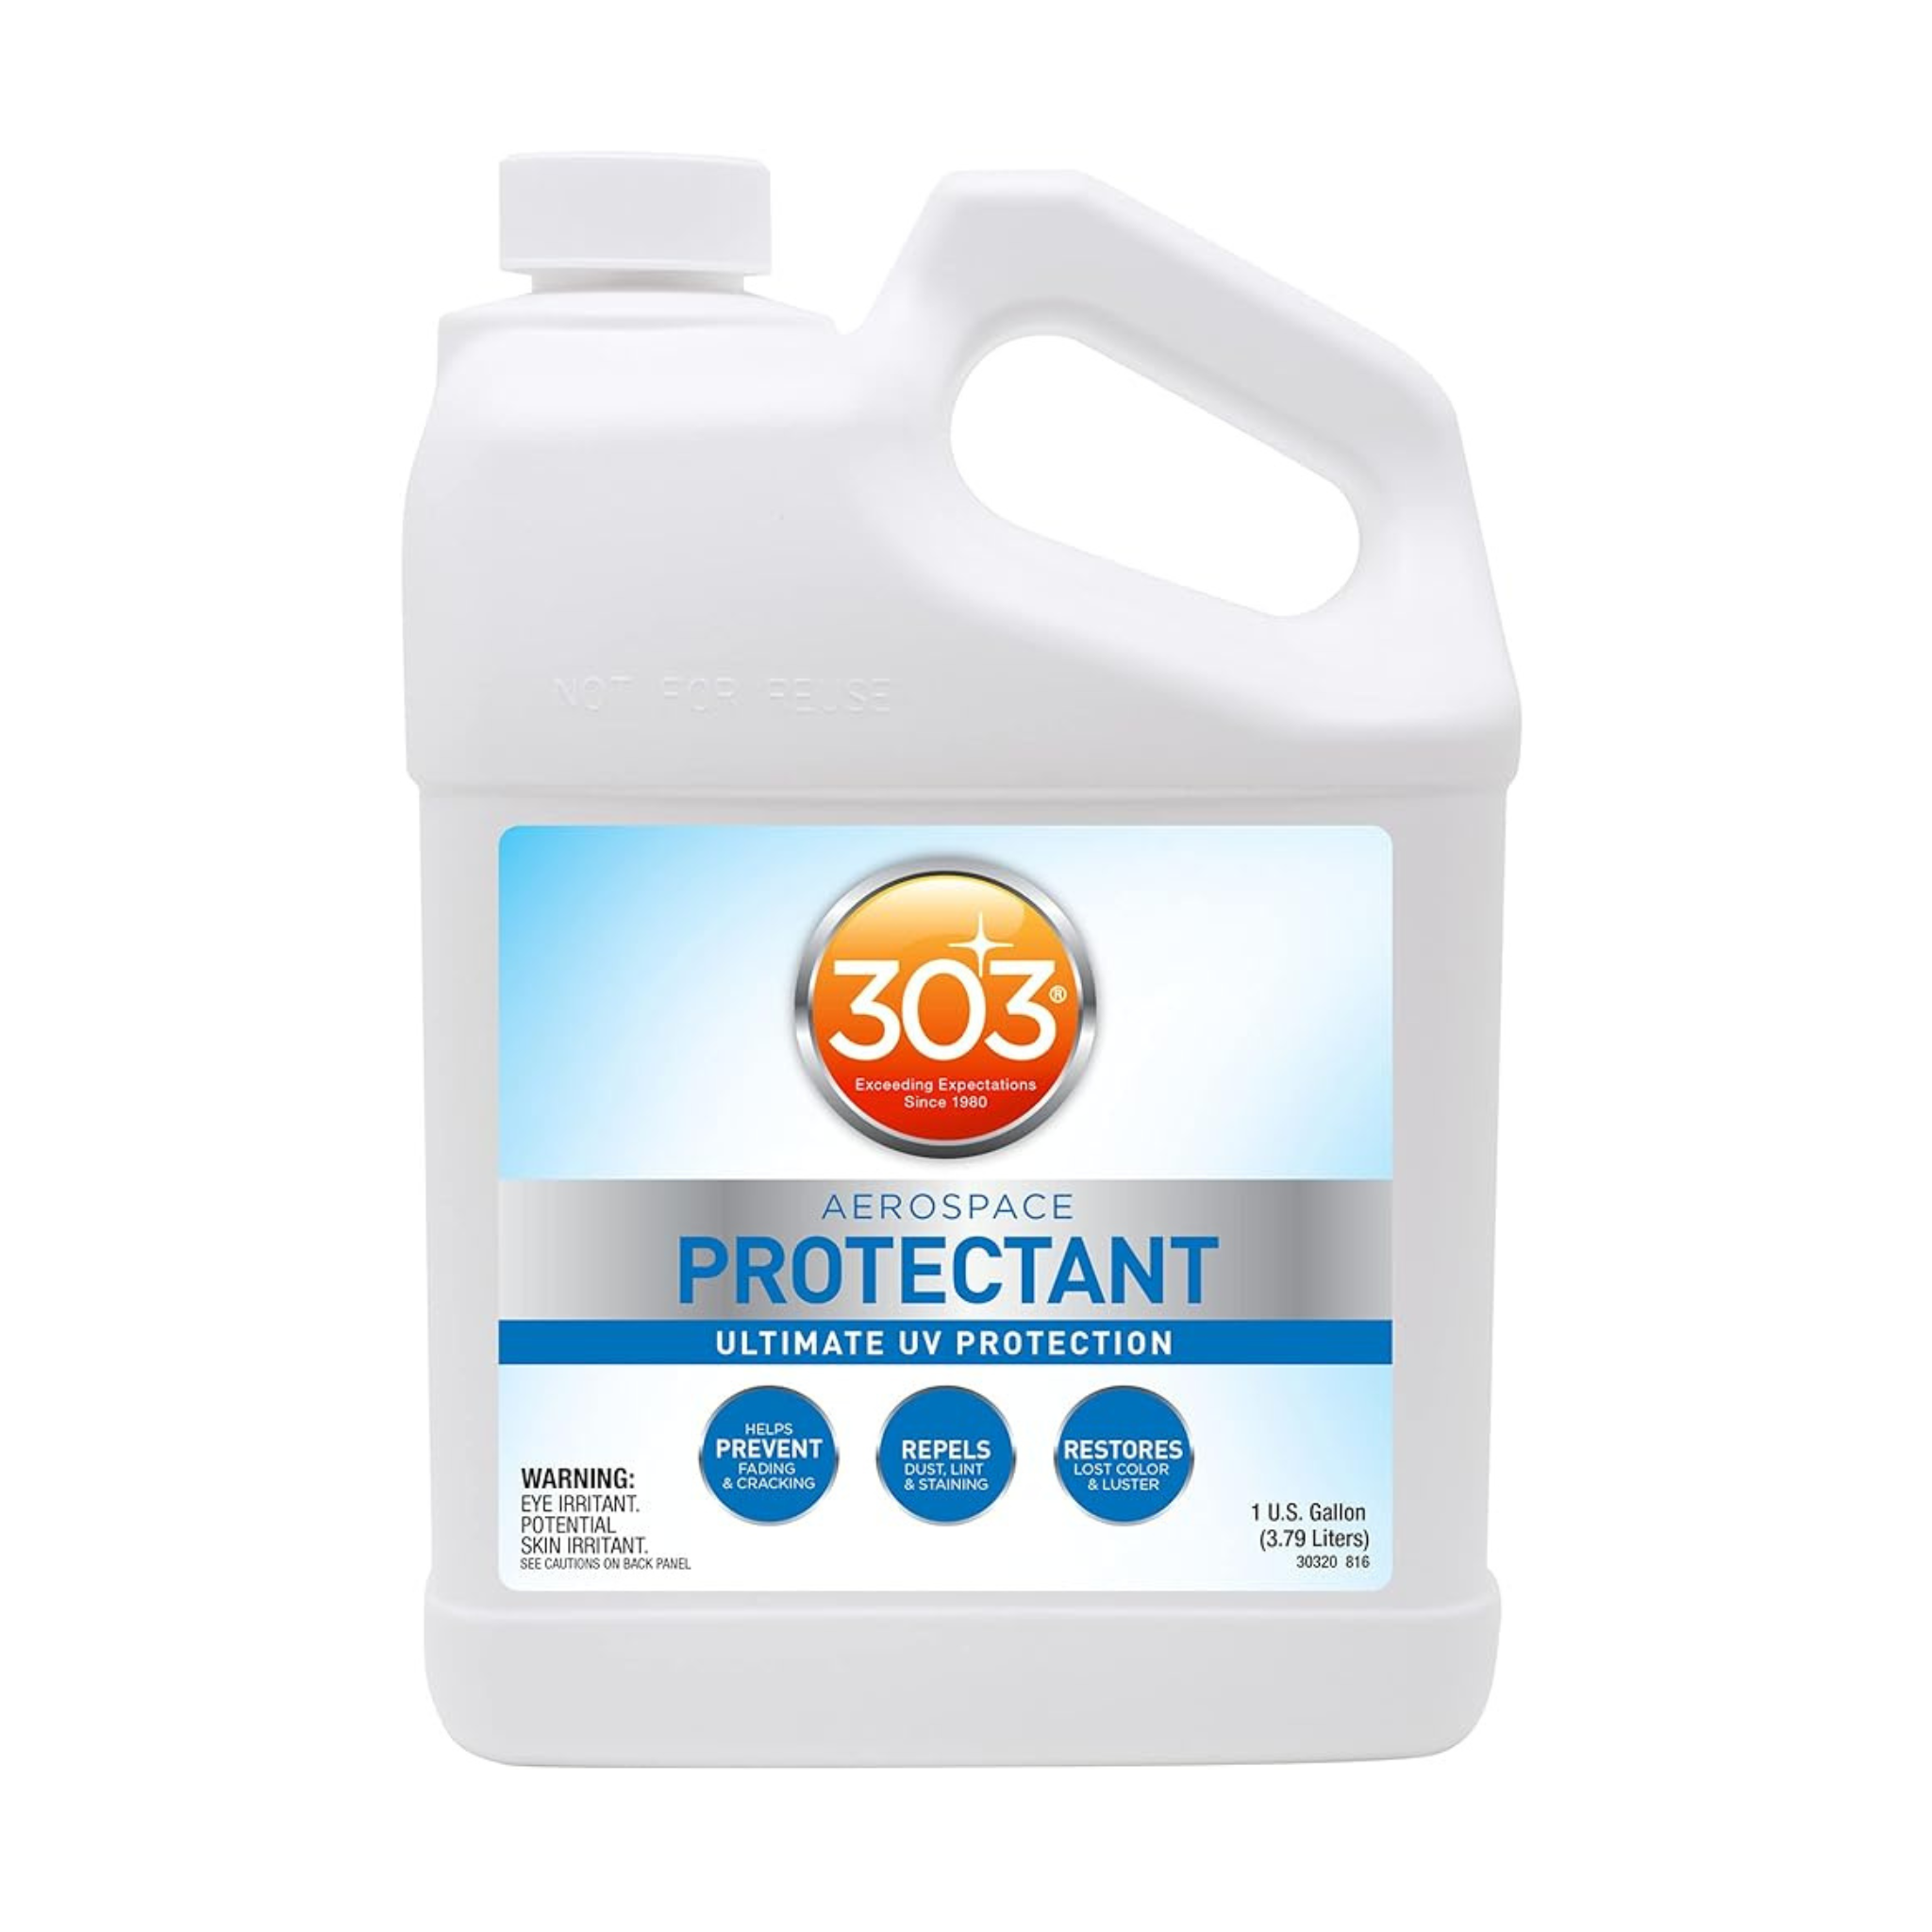 128oz 303 Products Aerospace Protectant Spray-on UV Protection